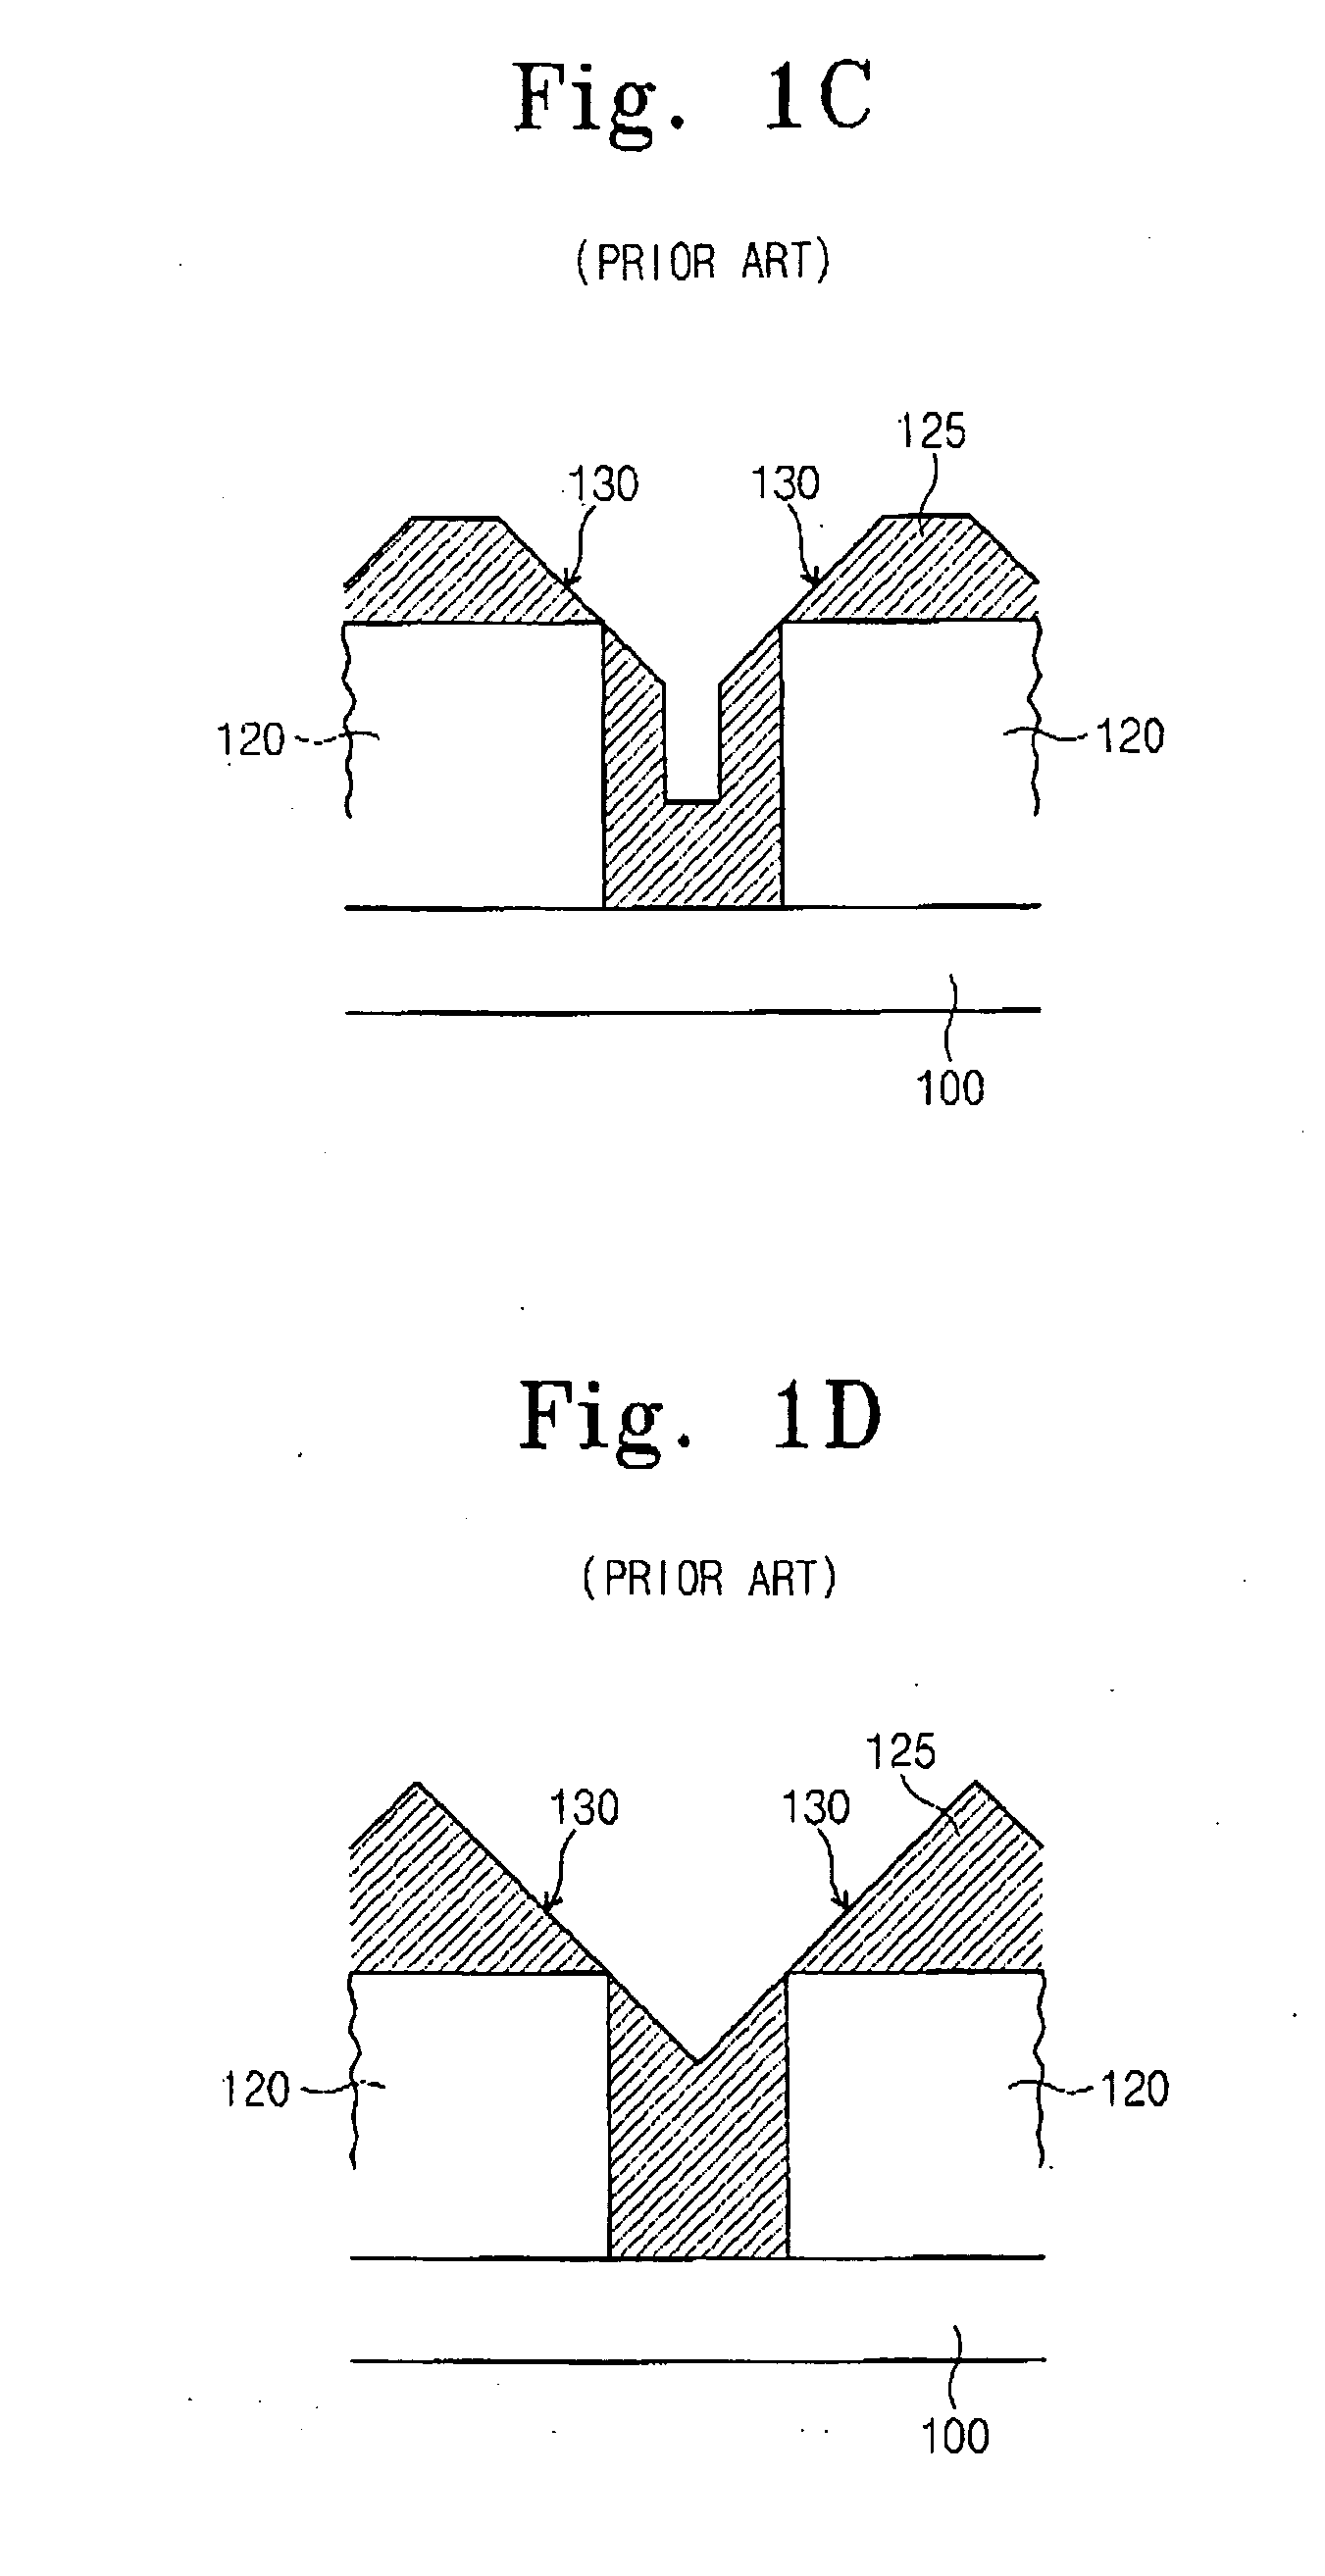 Methods of filling trenches using high-density plasma deposition (HDP)